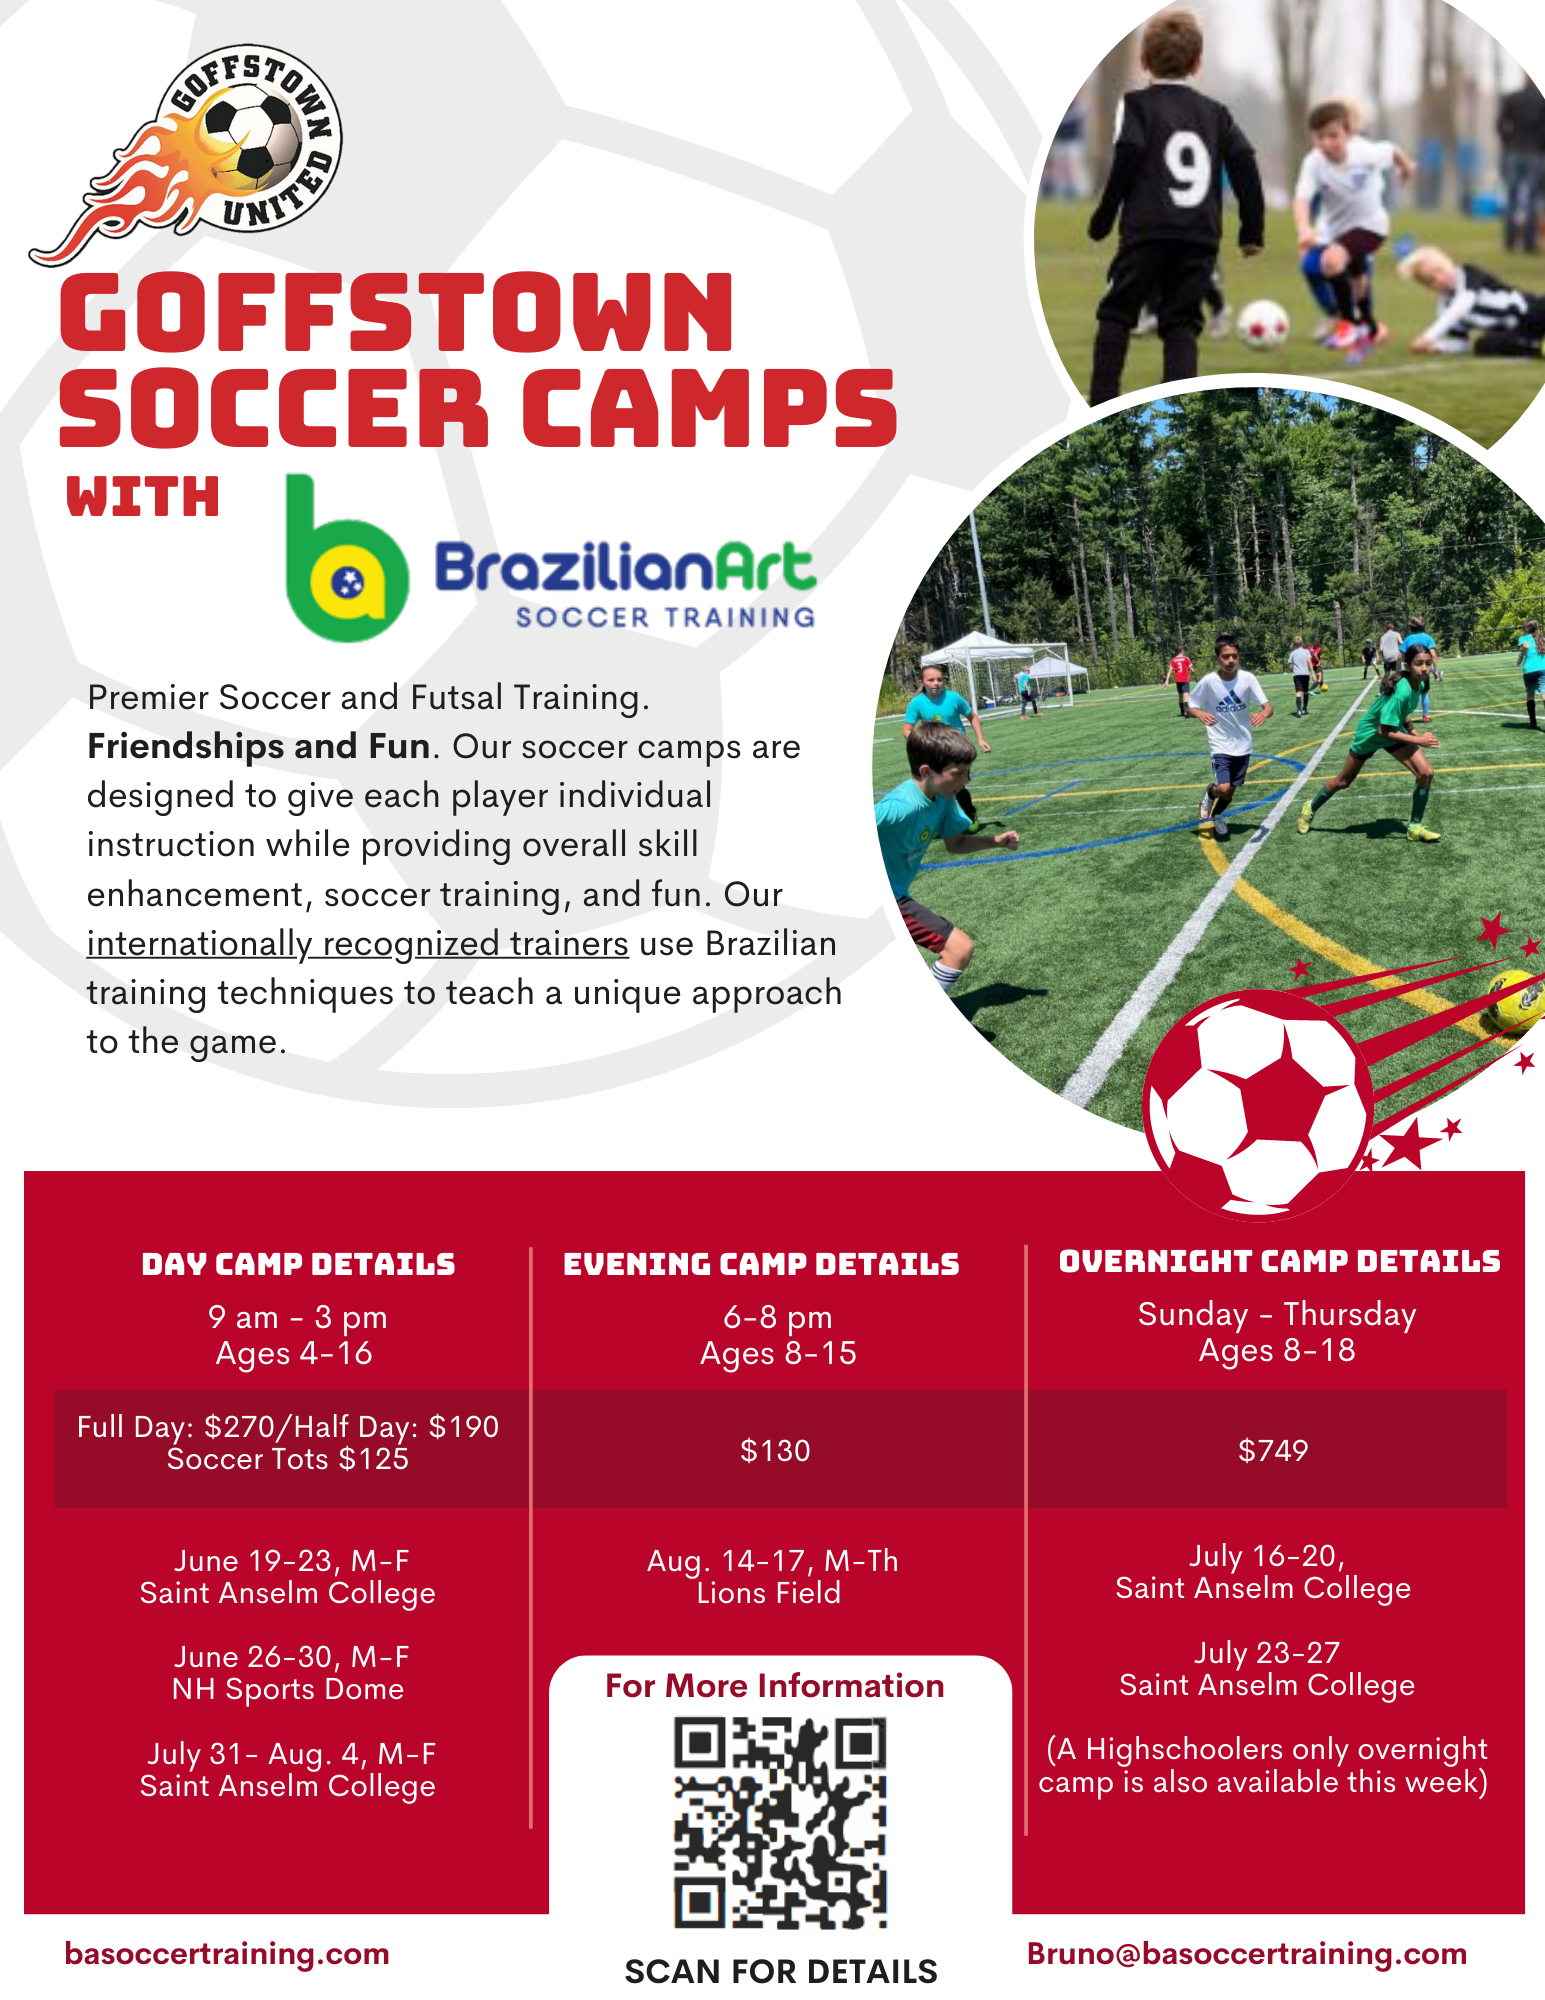 Summer Soccer Camp Opportunity in Goffstown